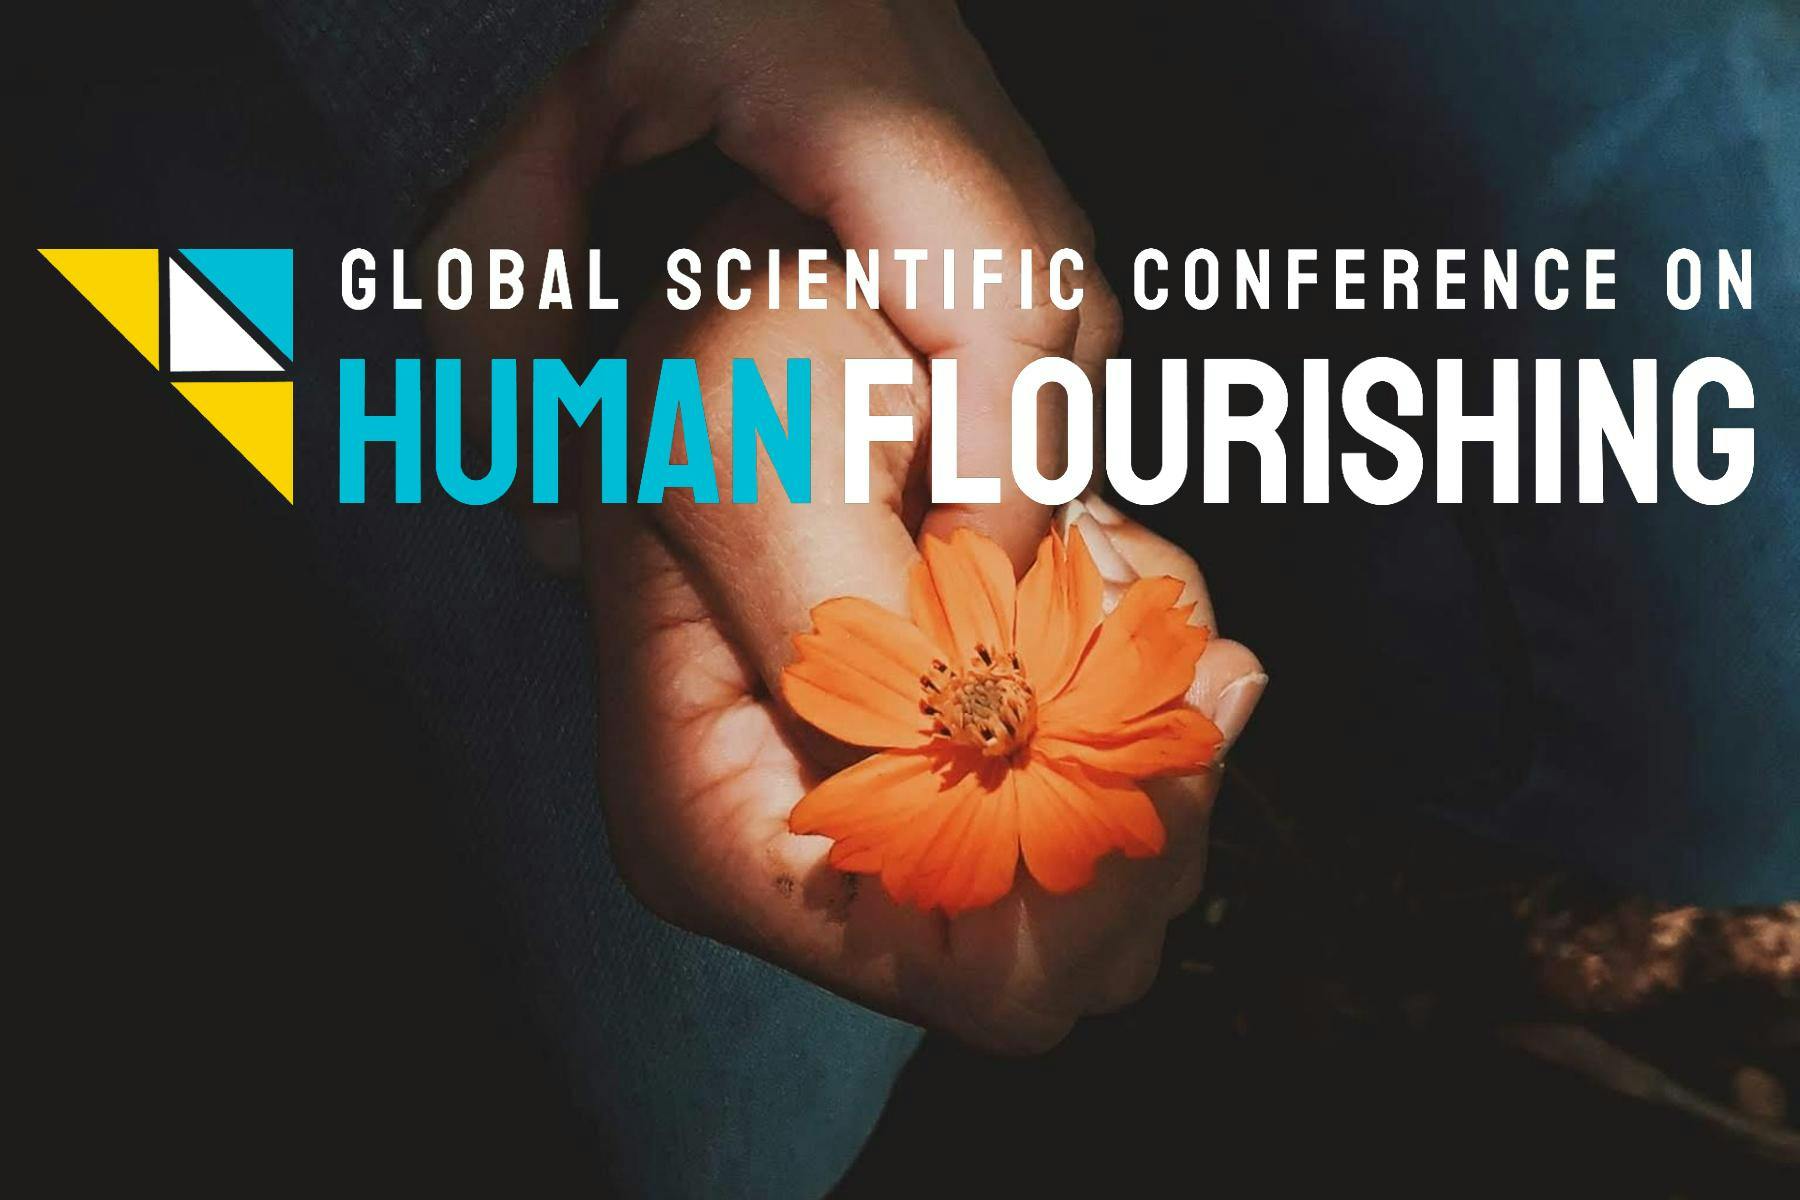 First Annual Scientific Conference on Human Flourishing